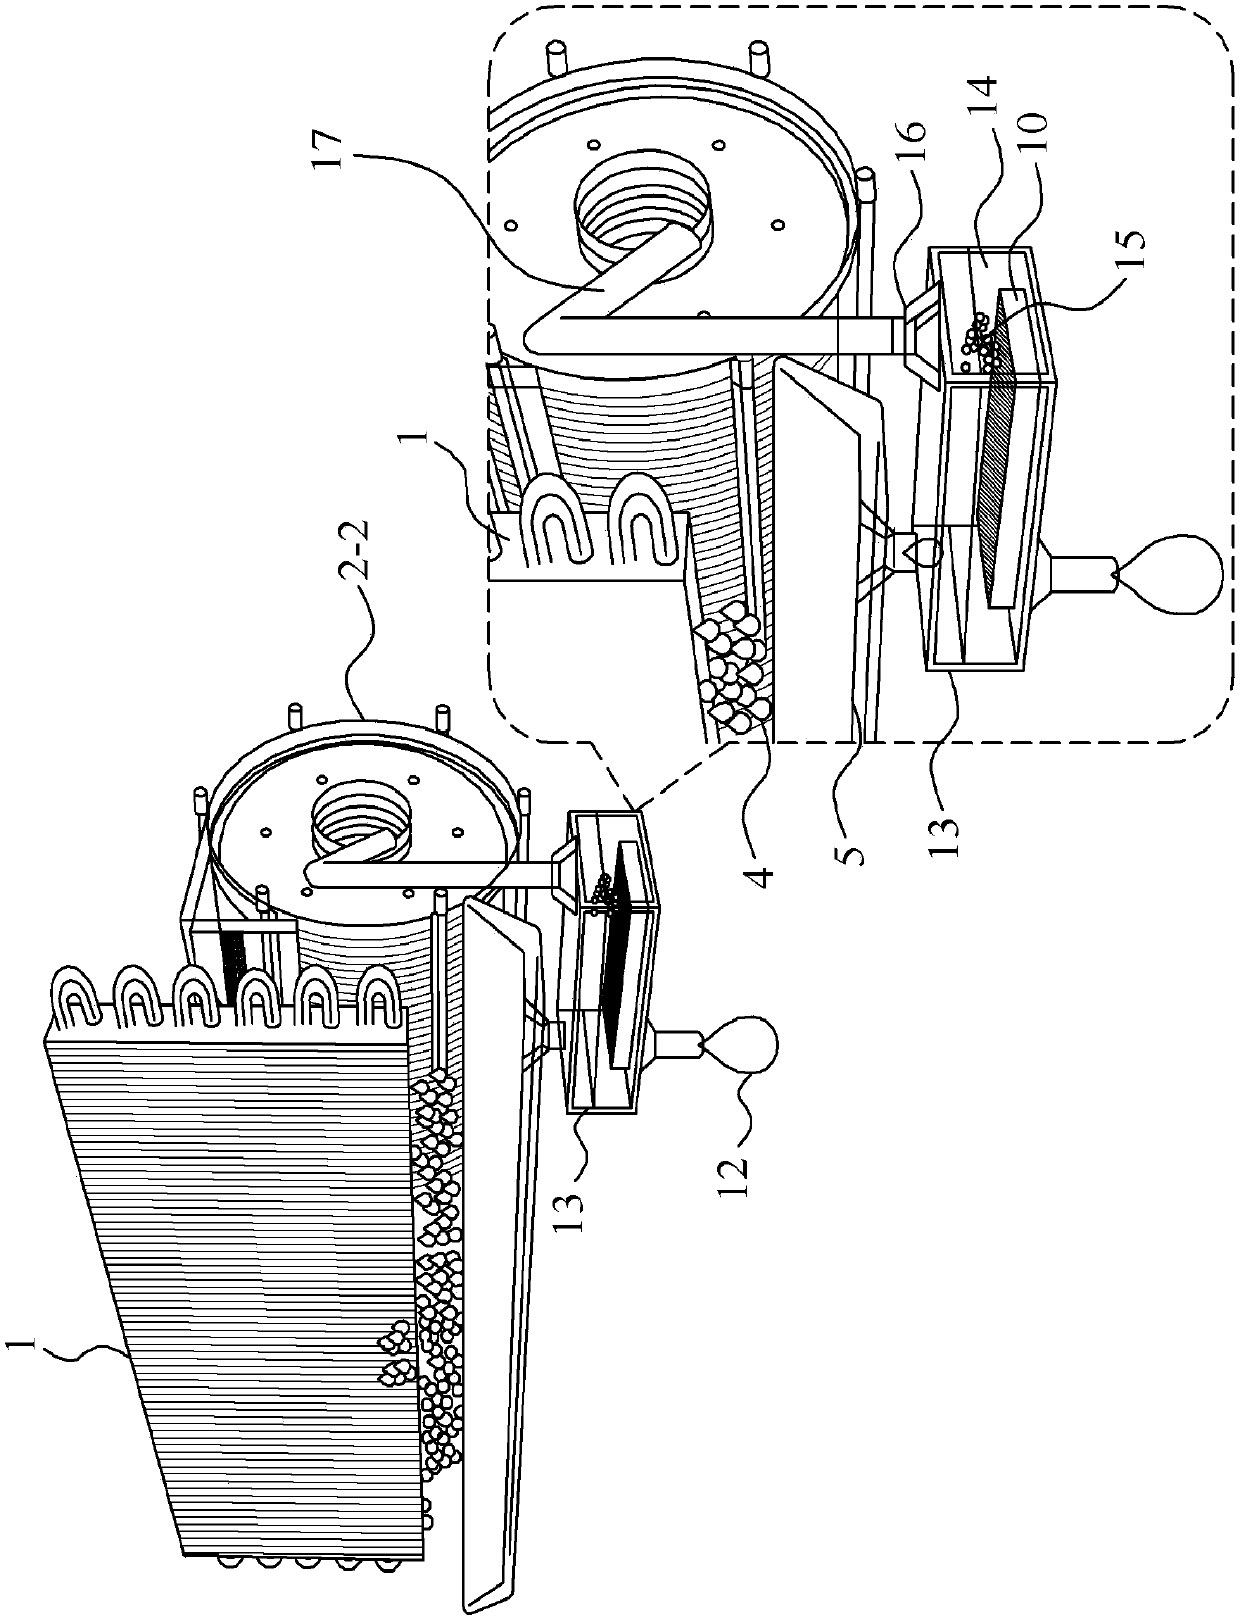 Cooling apparatus for killing fungi on dew condensation part by means of hydrogen generated by electrolyzing water condensed at dew condensation part of cooling apparatus